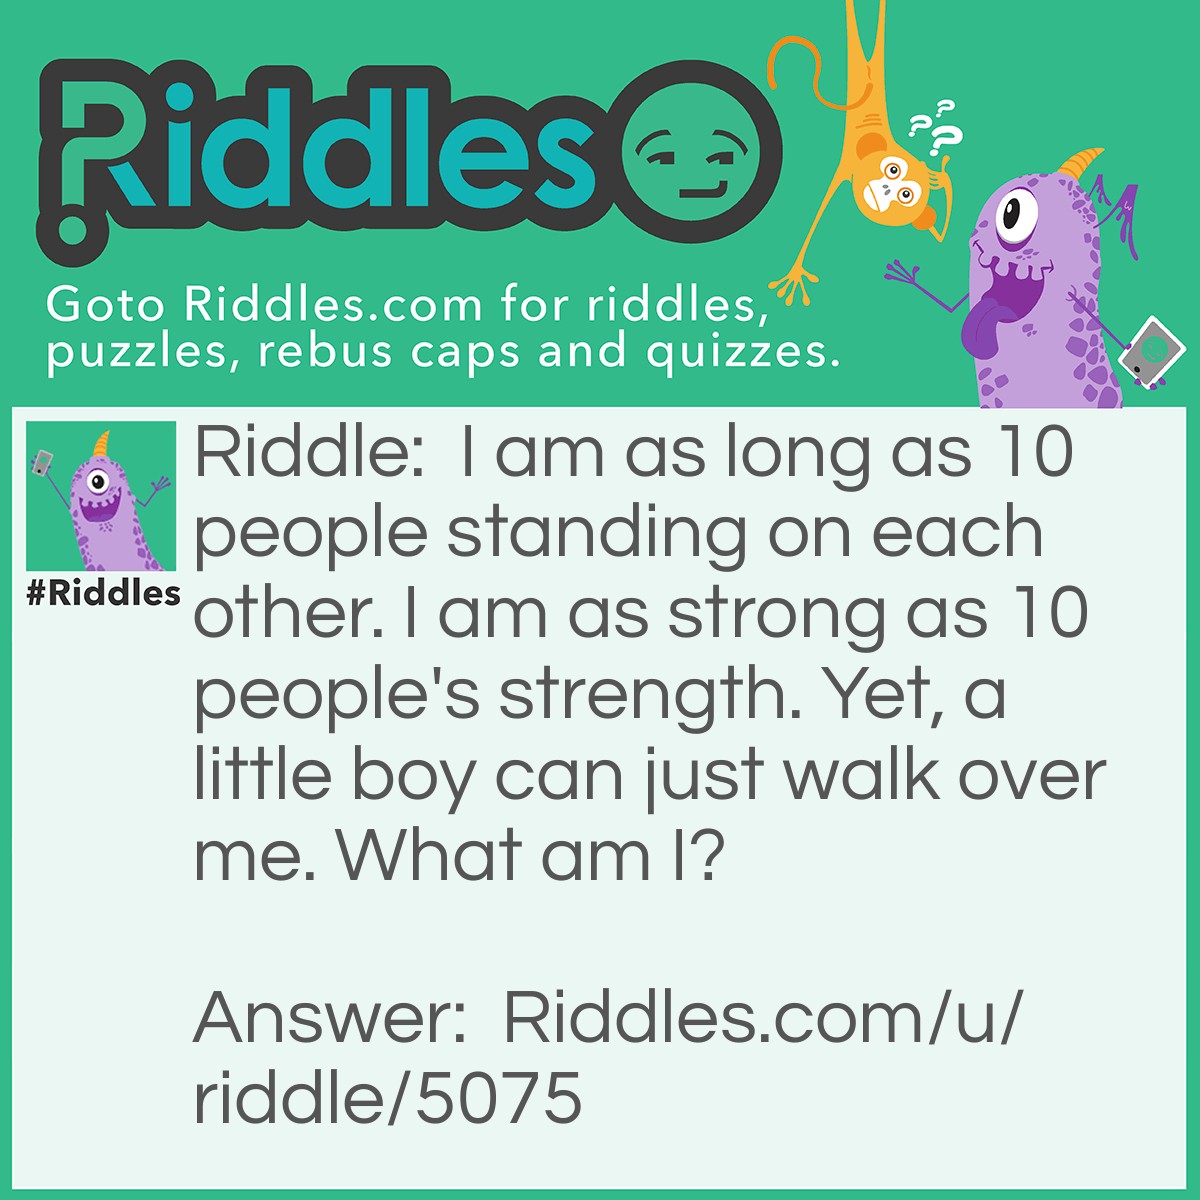 Riddle: I am as long as 10 people standing on each other. I am as strong as 10 people's strength. Yet, a little boy can just walk over me. What am I? Answer: A rope.